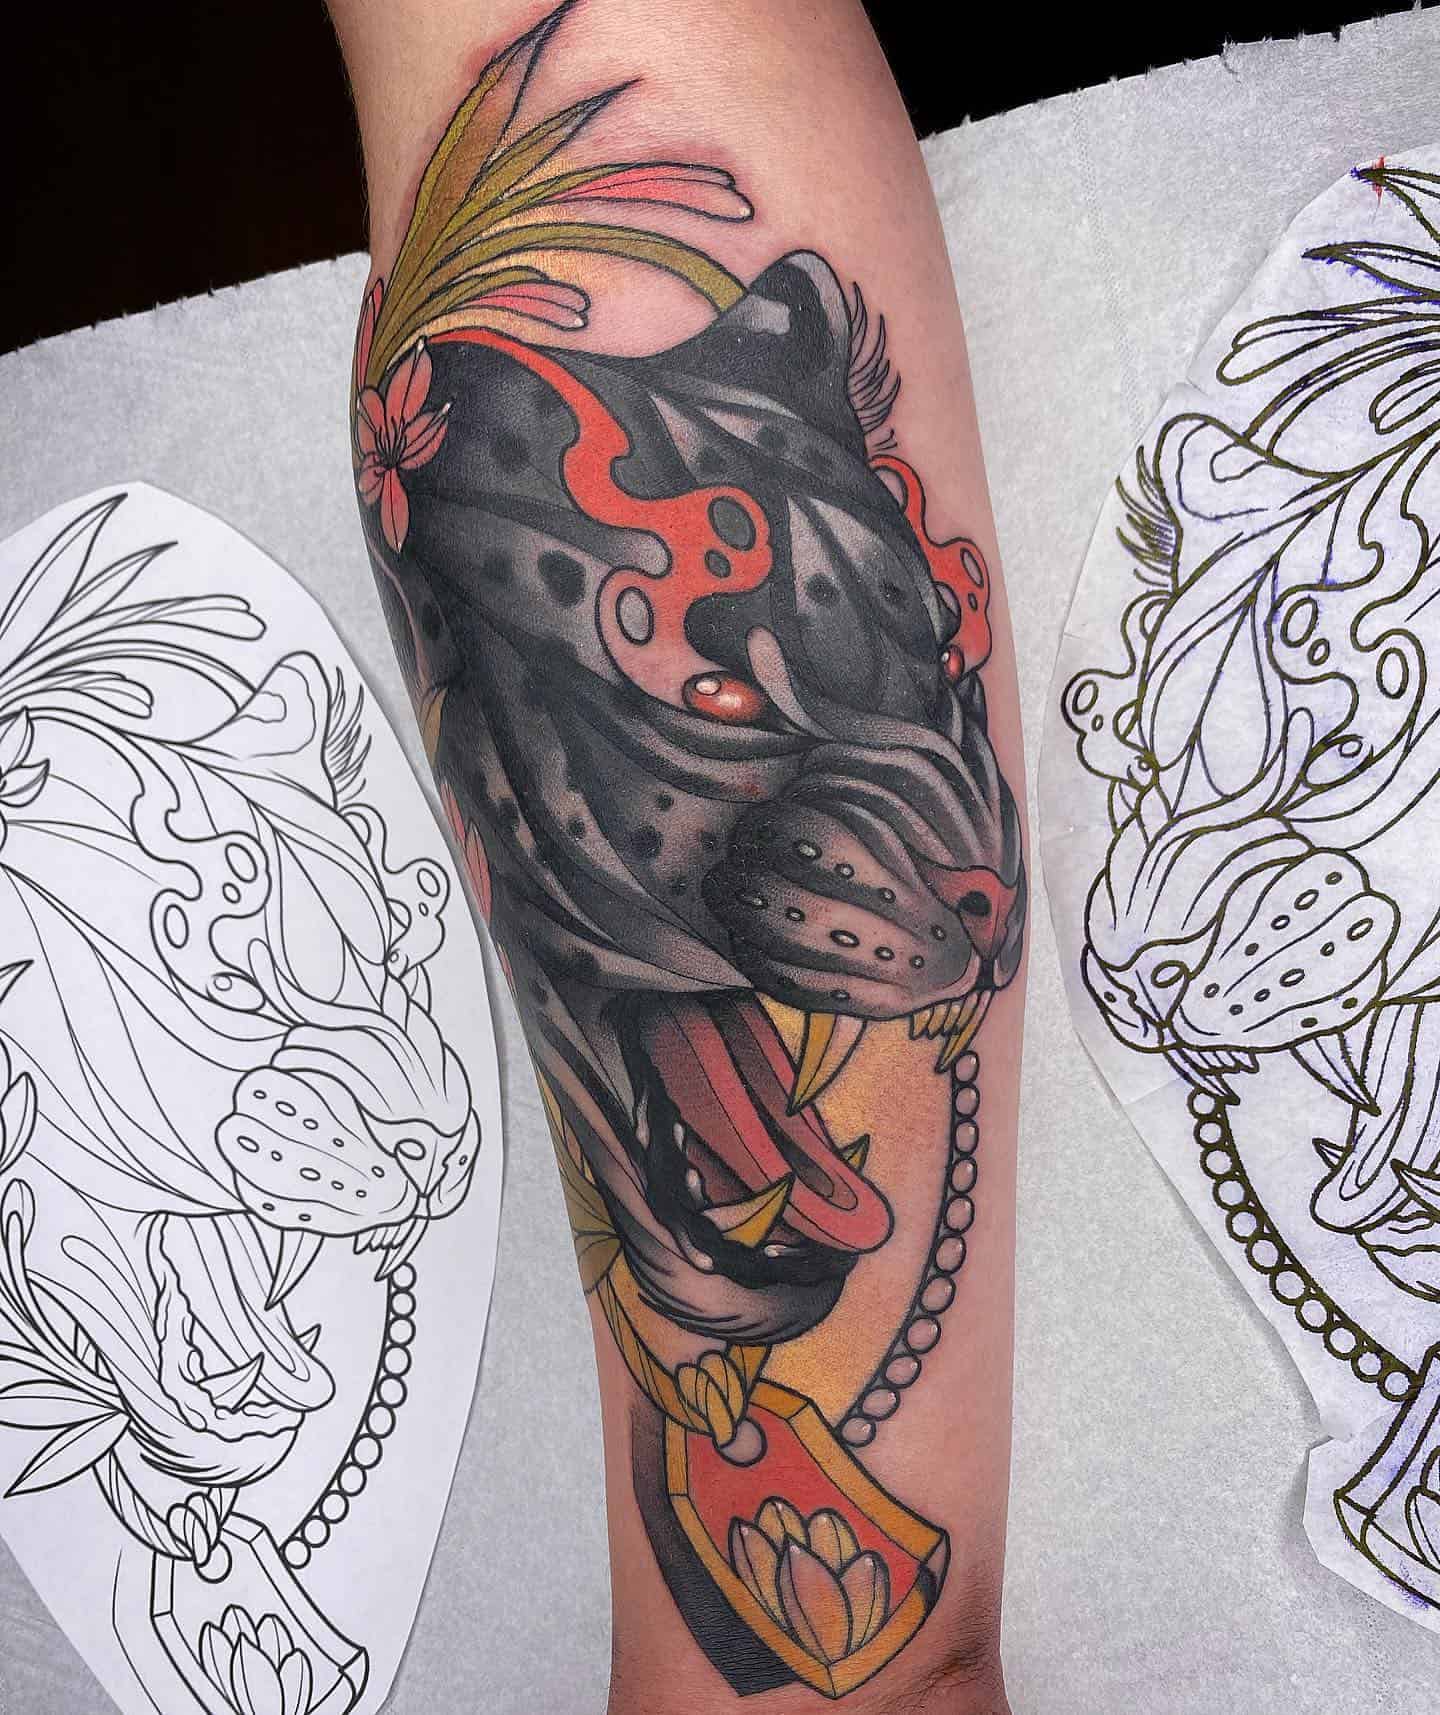 Panther Tattoo Ideas 16